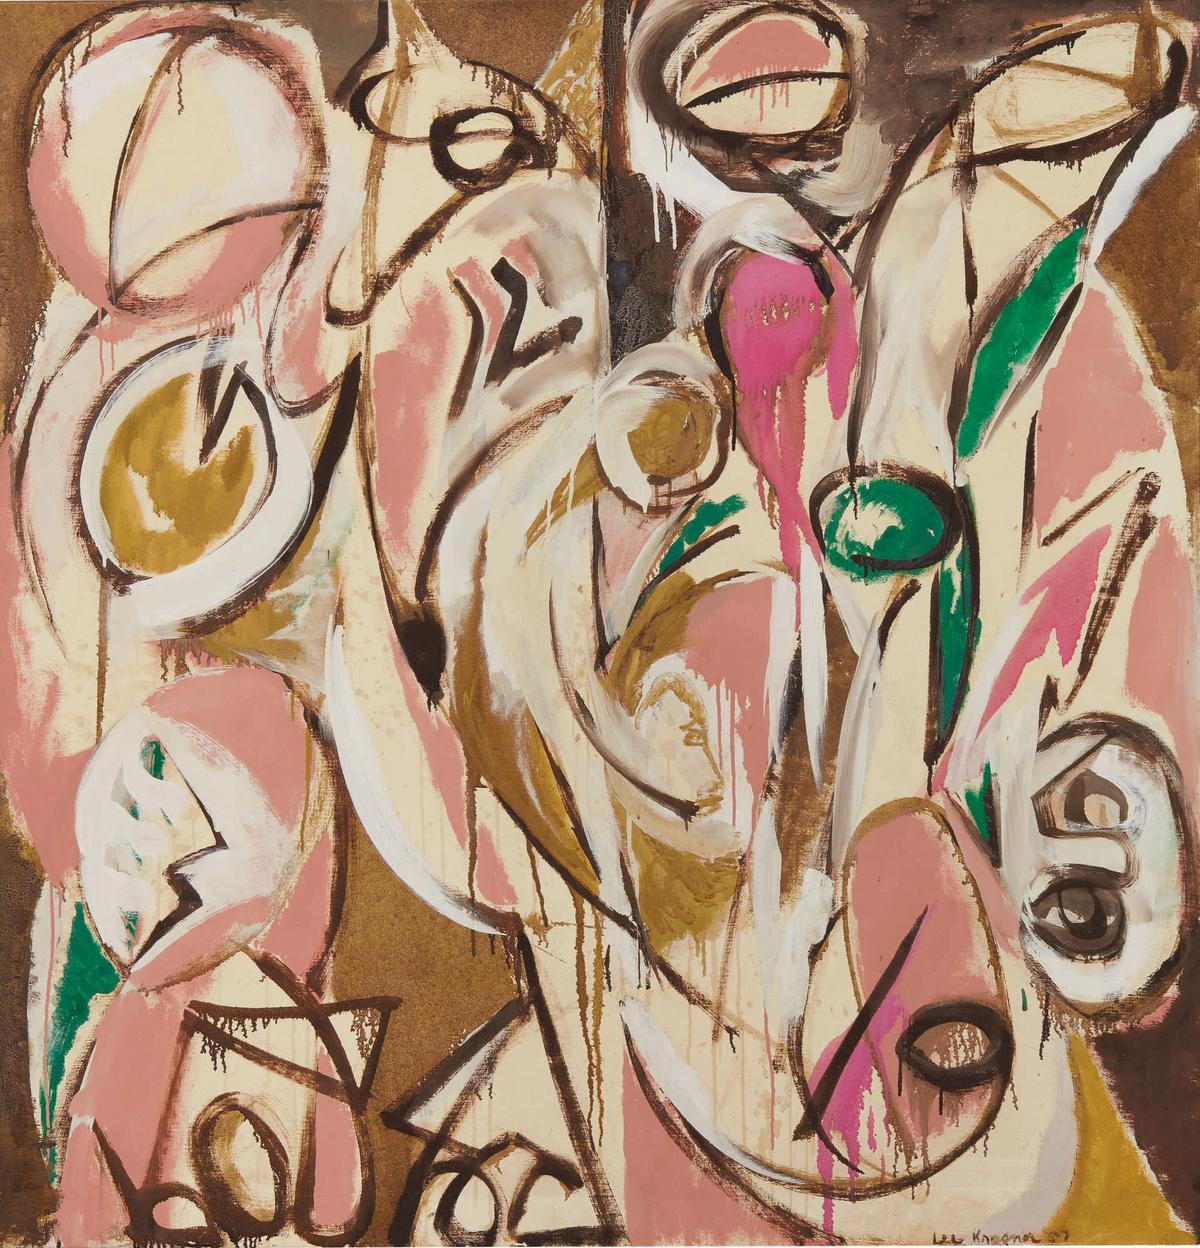 Lee Krasner's "Re - Echo" (1957) is estimated to sell for $4m-$6m. Courtesy of Sotheby's